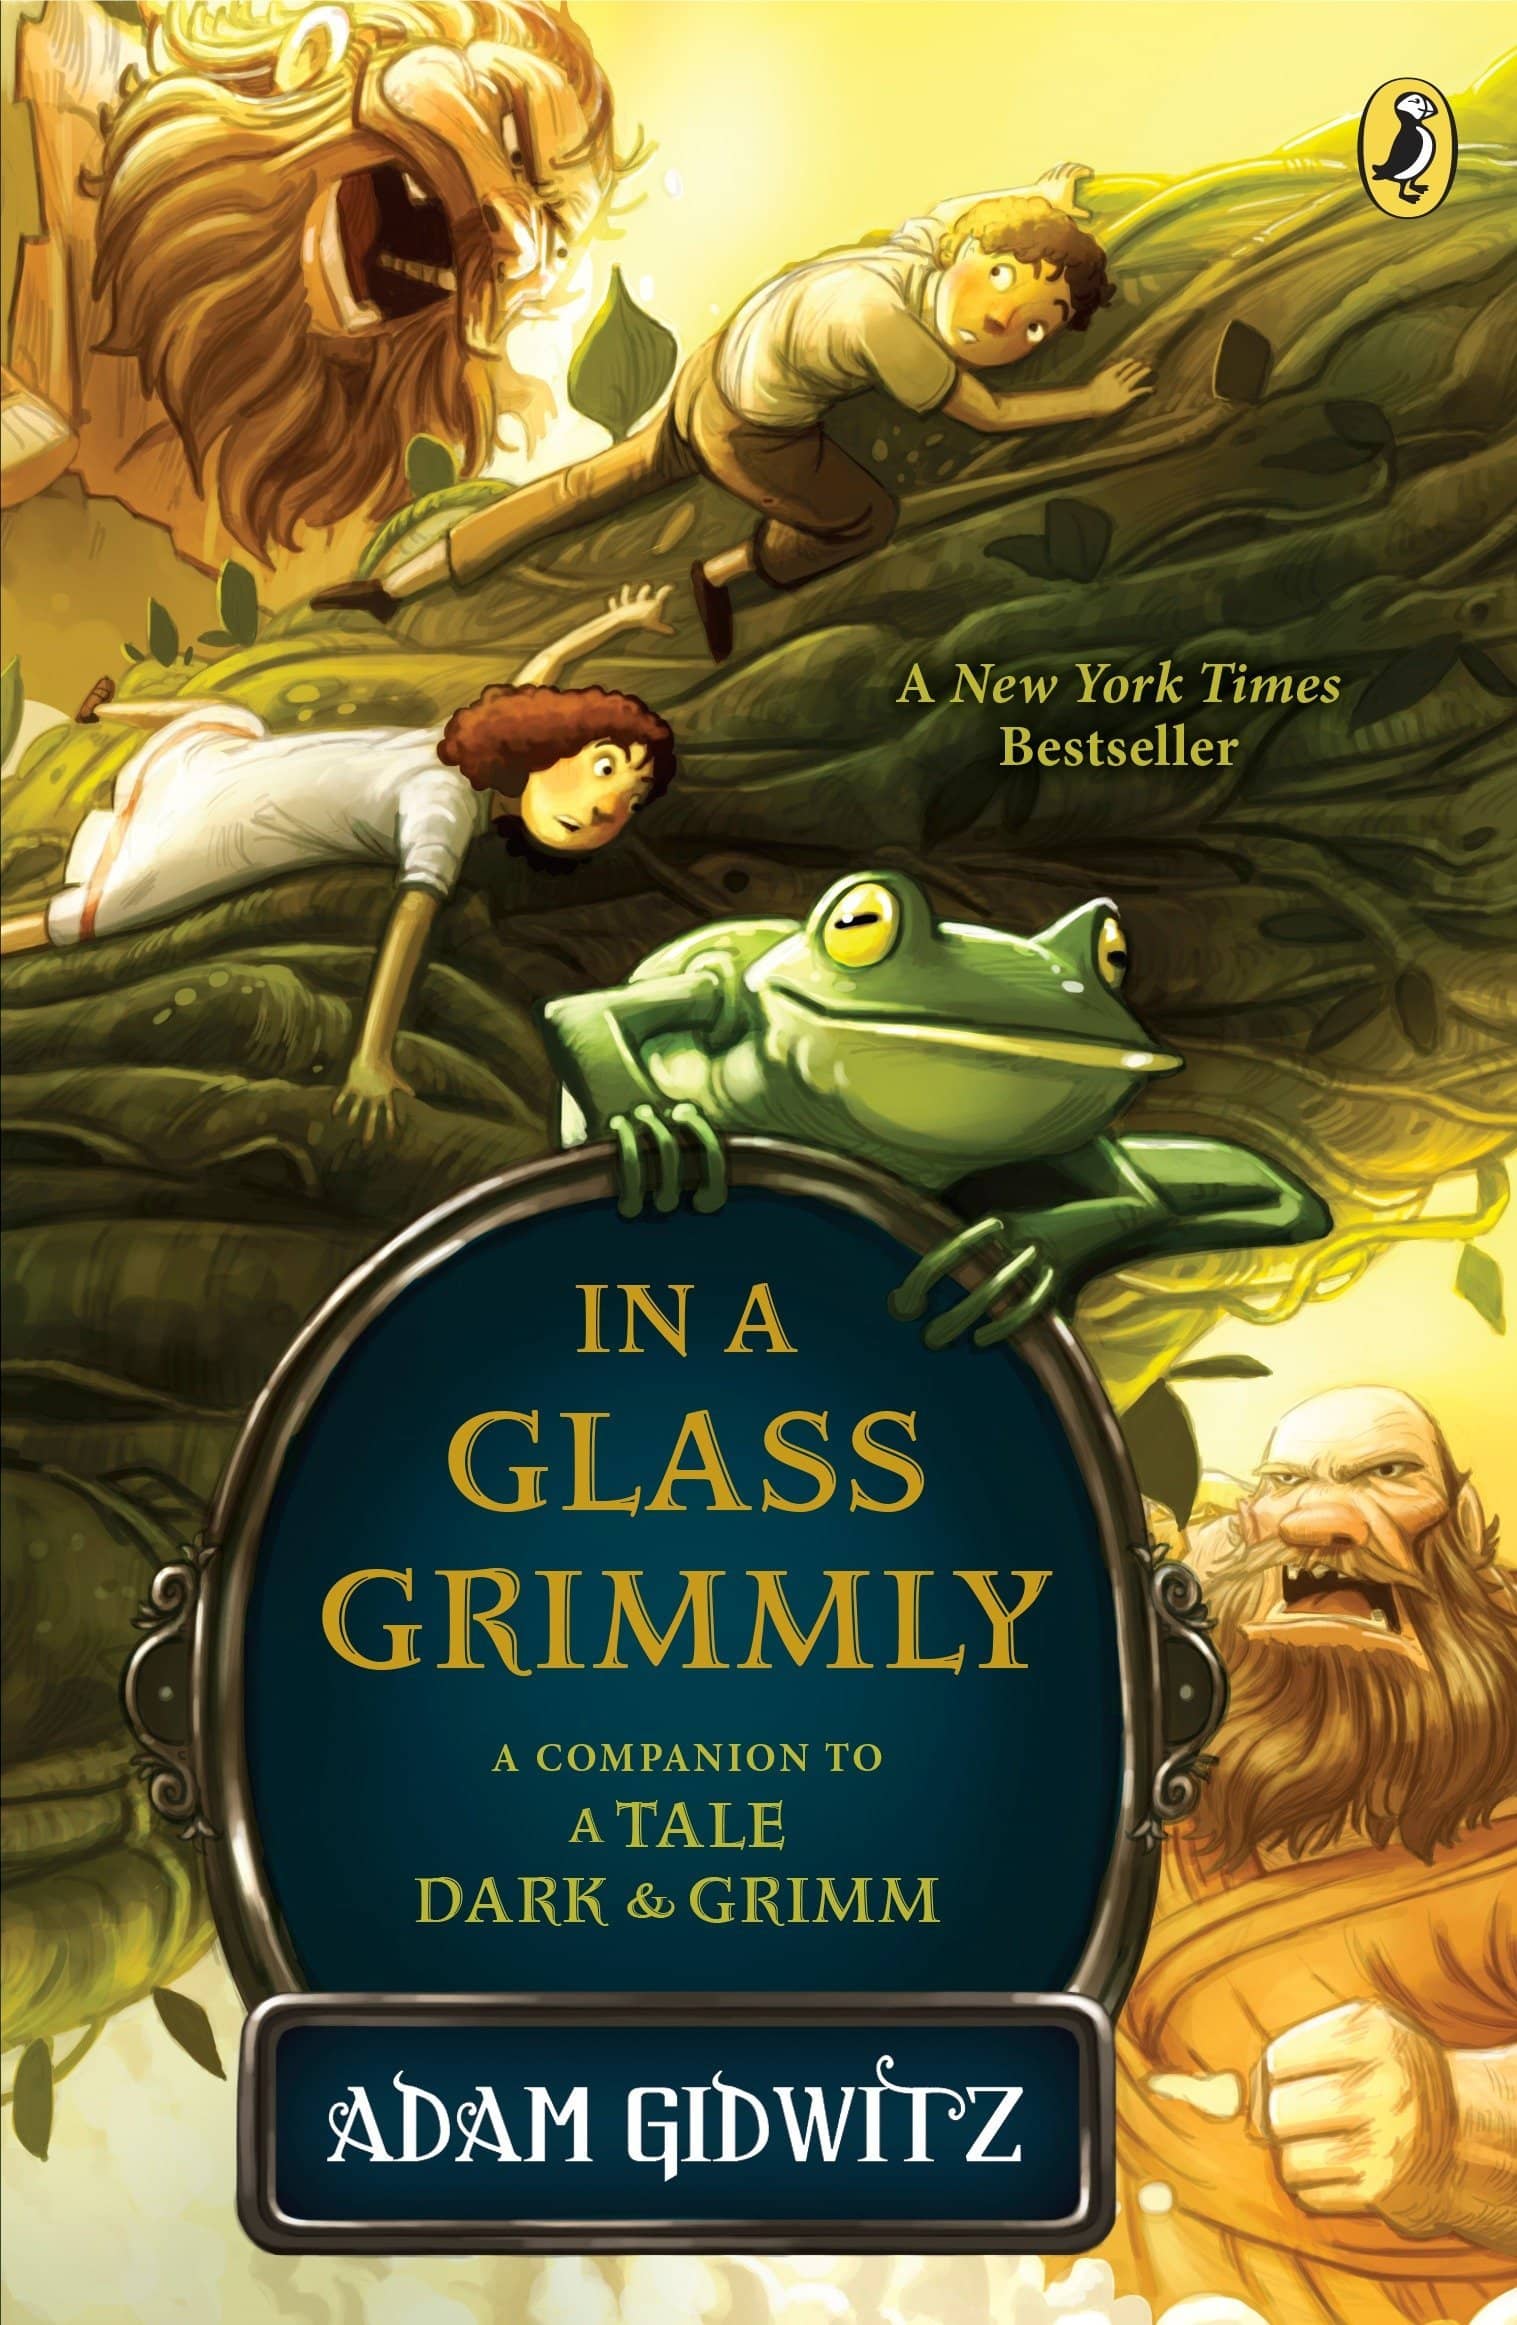 Witches, Menacing Forests, & the True Meaning of Fairy Tales: A Tale Dark &  Grimm by Adam Gidwitz – Black Gate